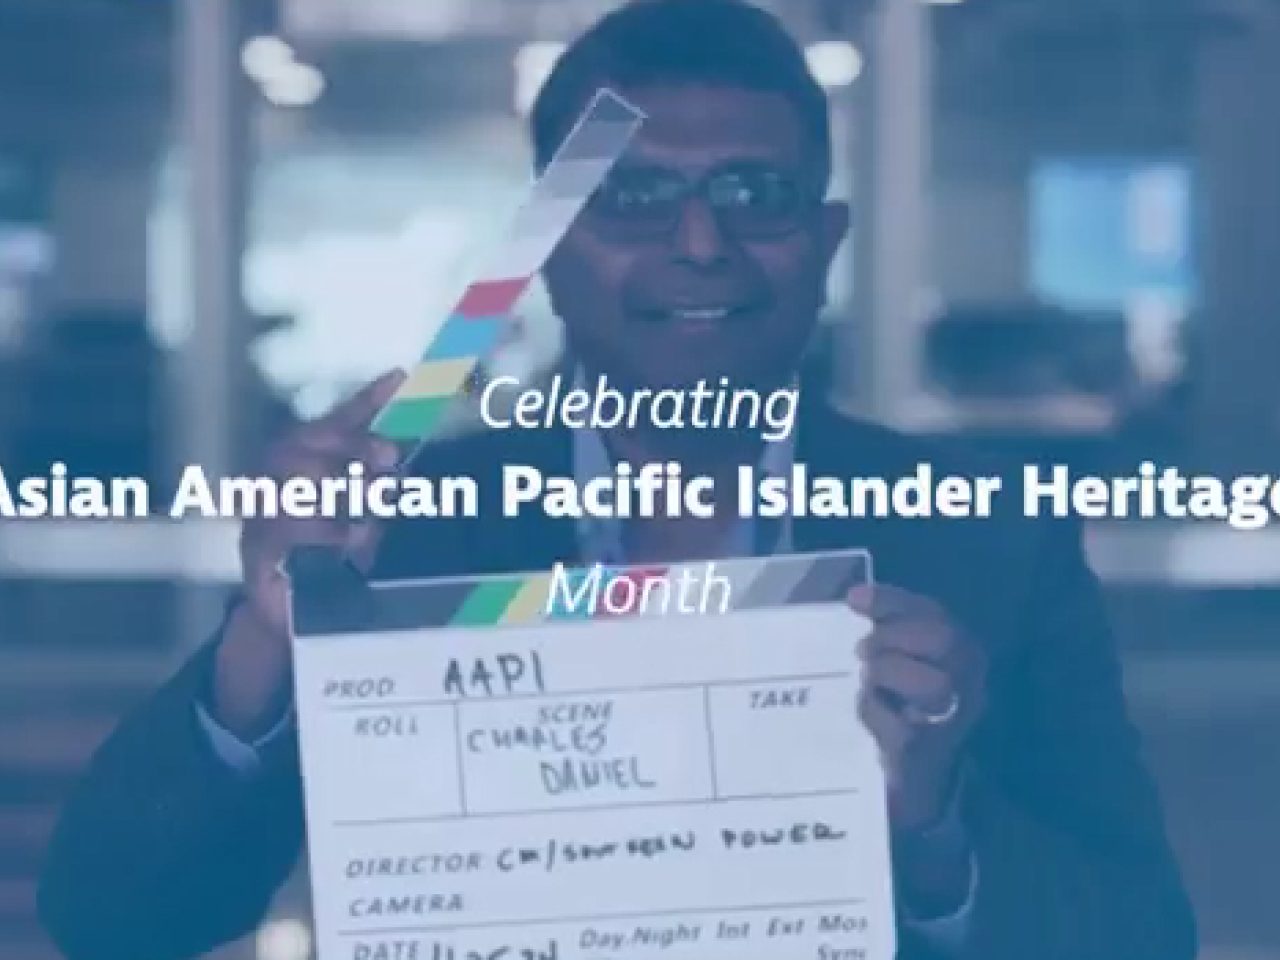 A person holding a clapboard. "Celebrating Asia American Pacific Islander Heritage" super imposed on top.